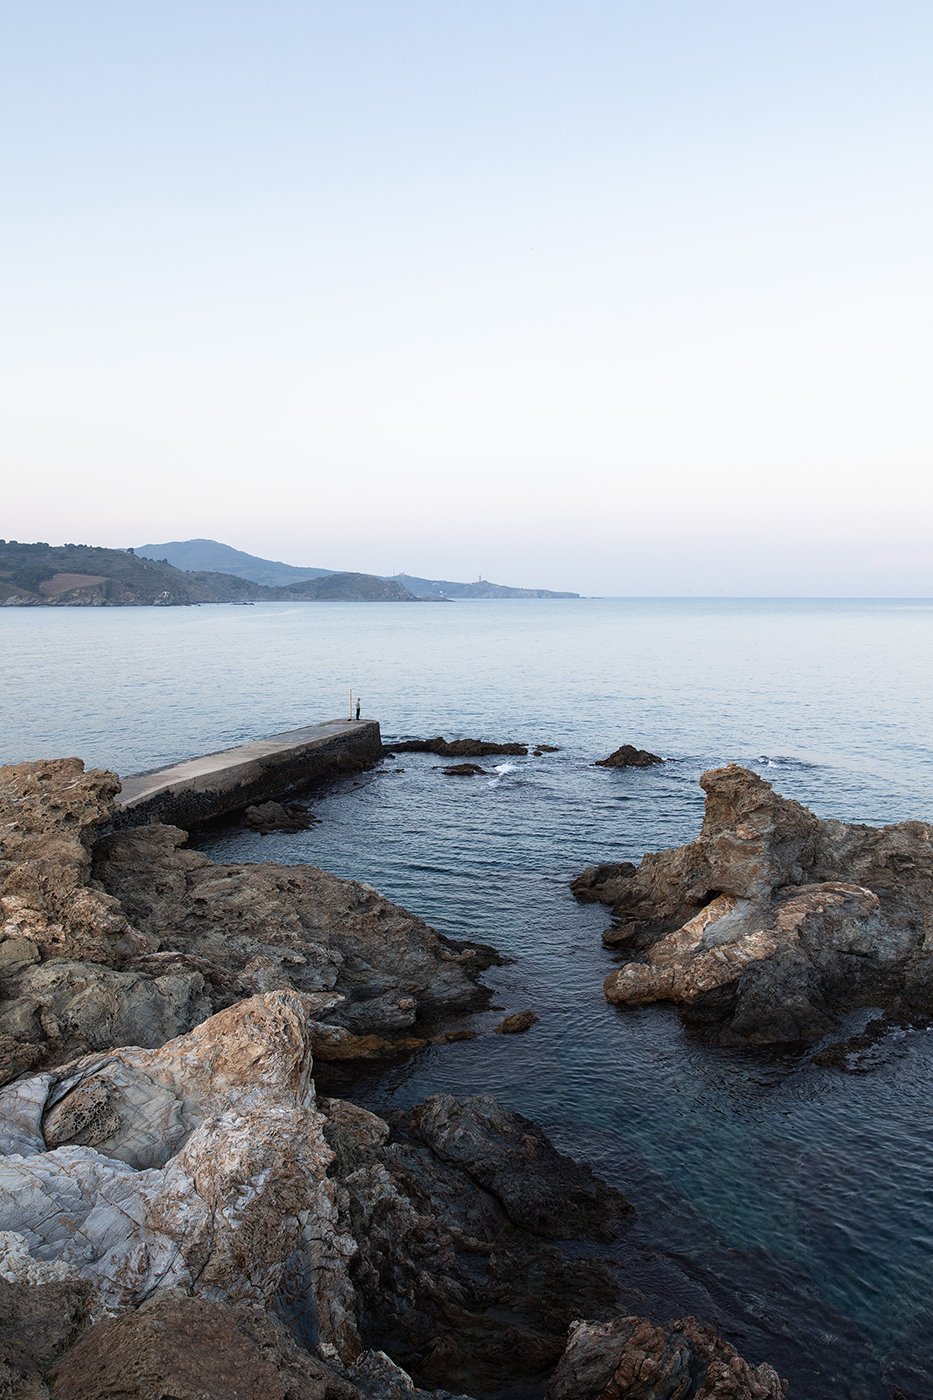 The bay at Banyuls-Sur-Mer in southern France shot by Markus Altmann for Terra Mater magazin